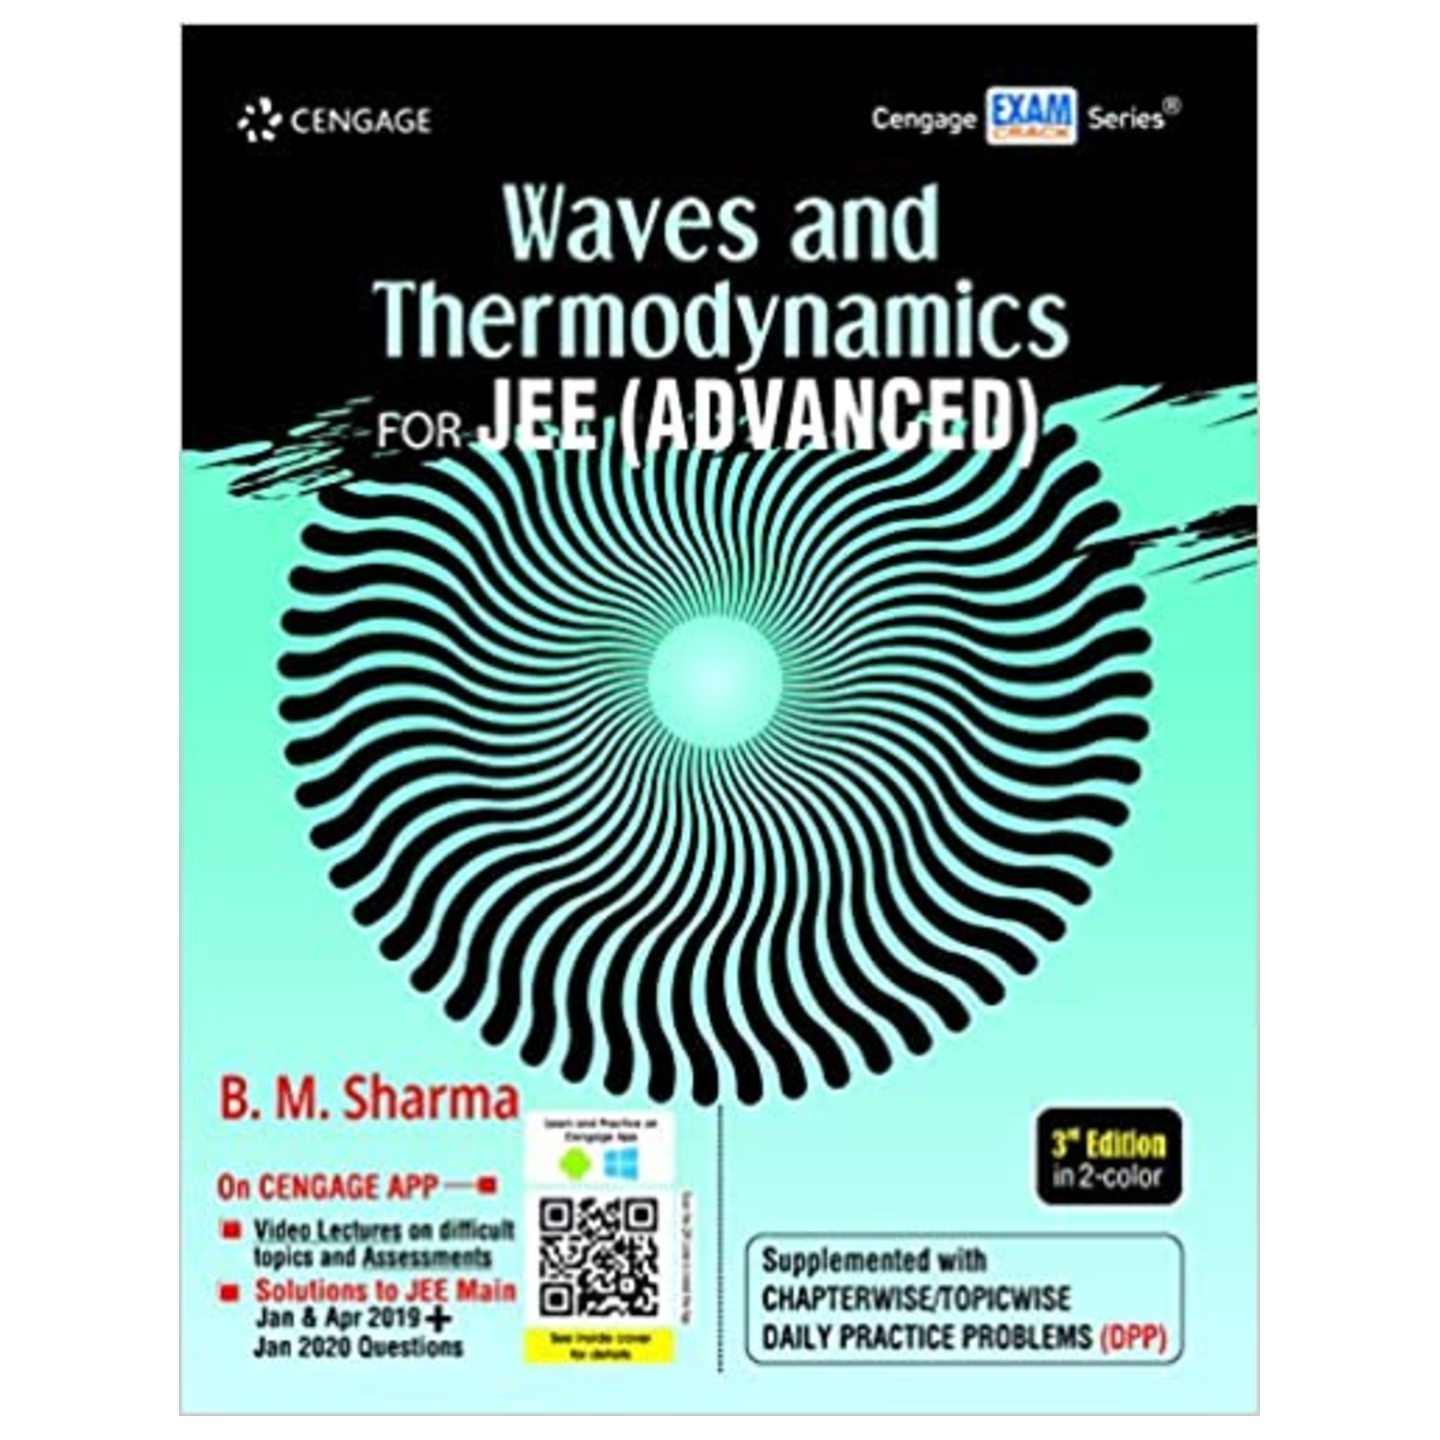 CENGAGE Waves and Thermodynamics for JEE Advanced B M SHARMA